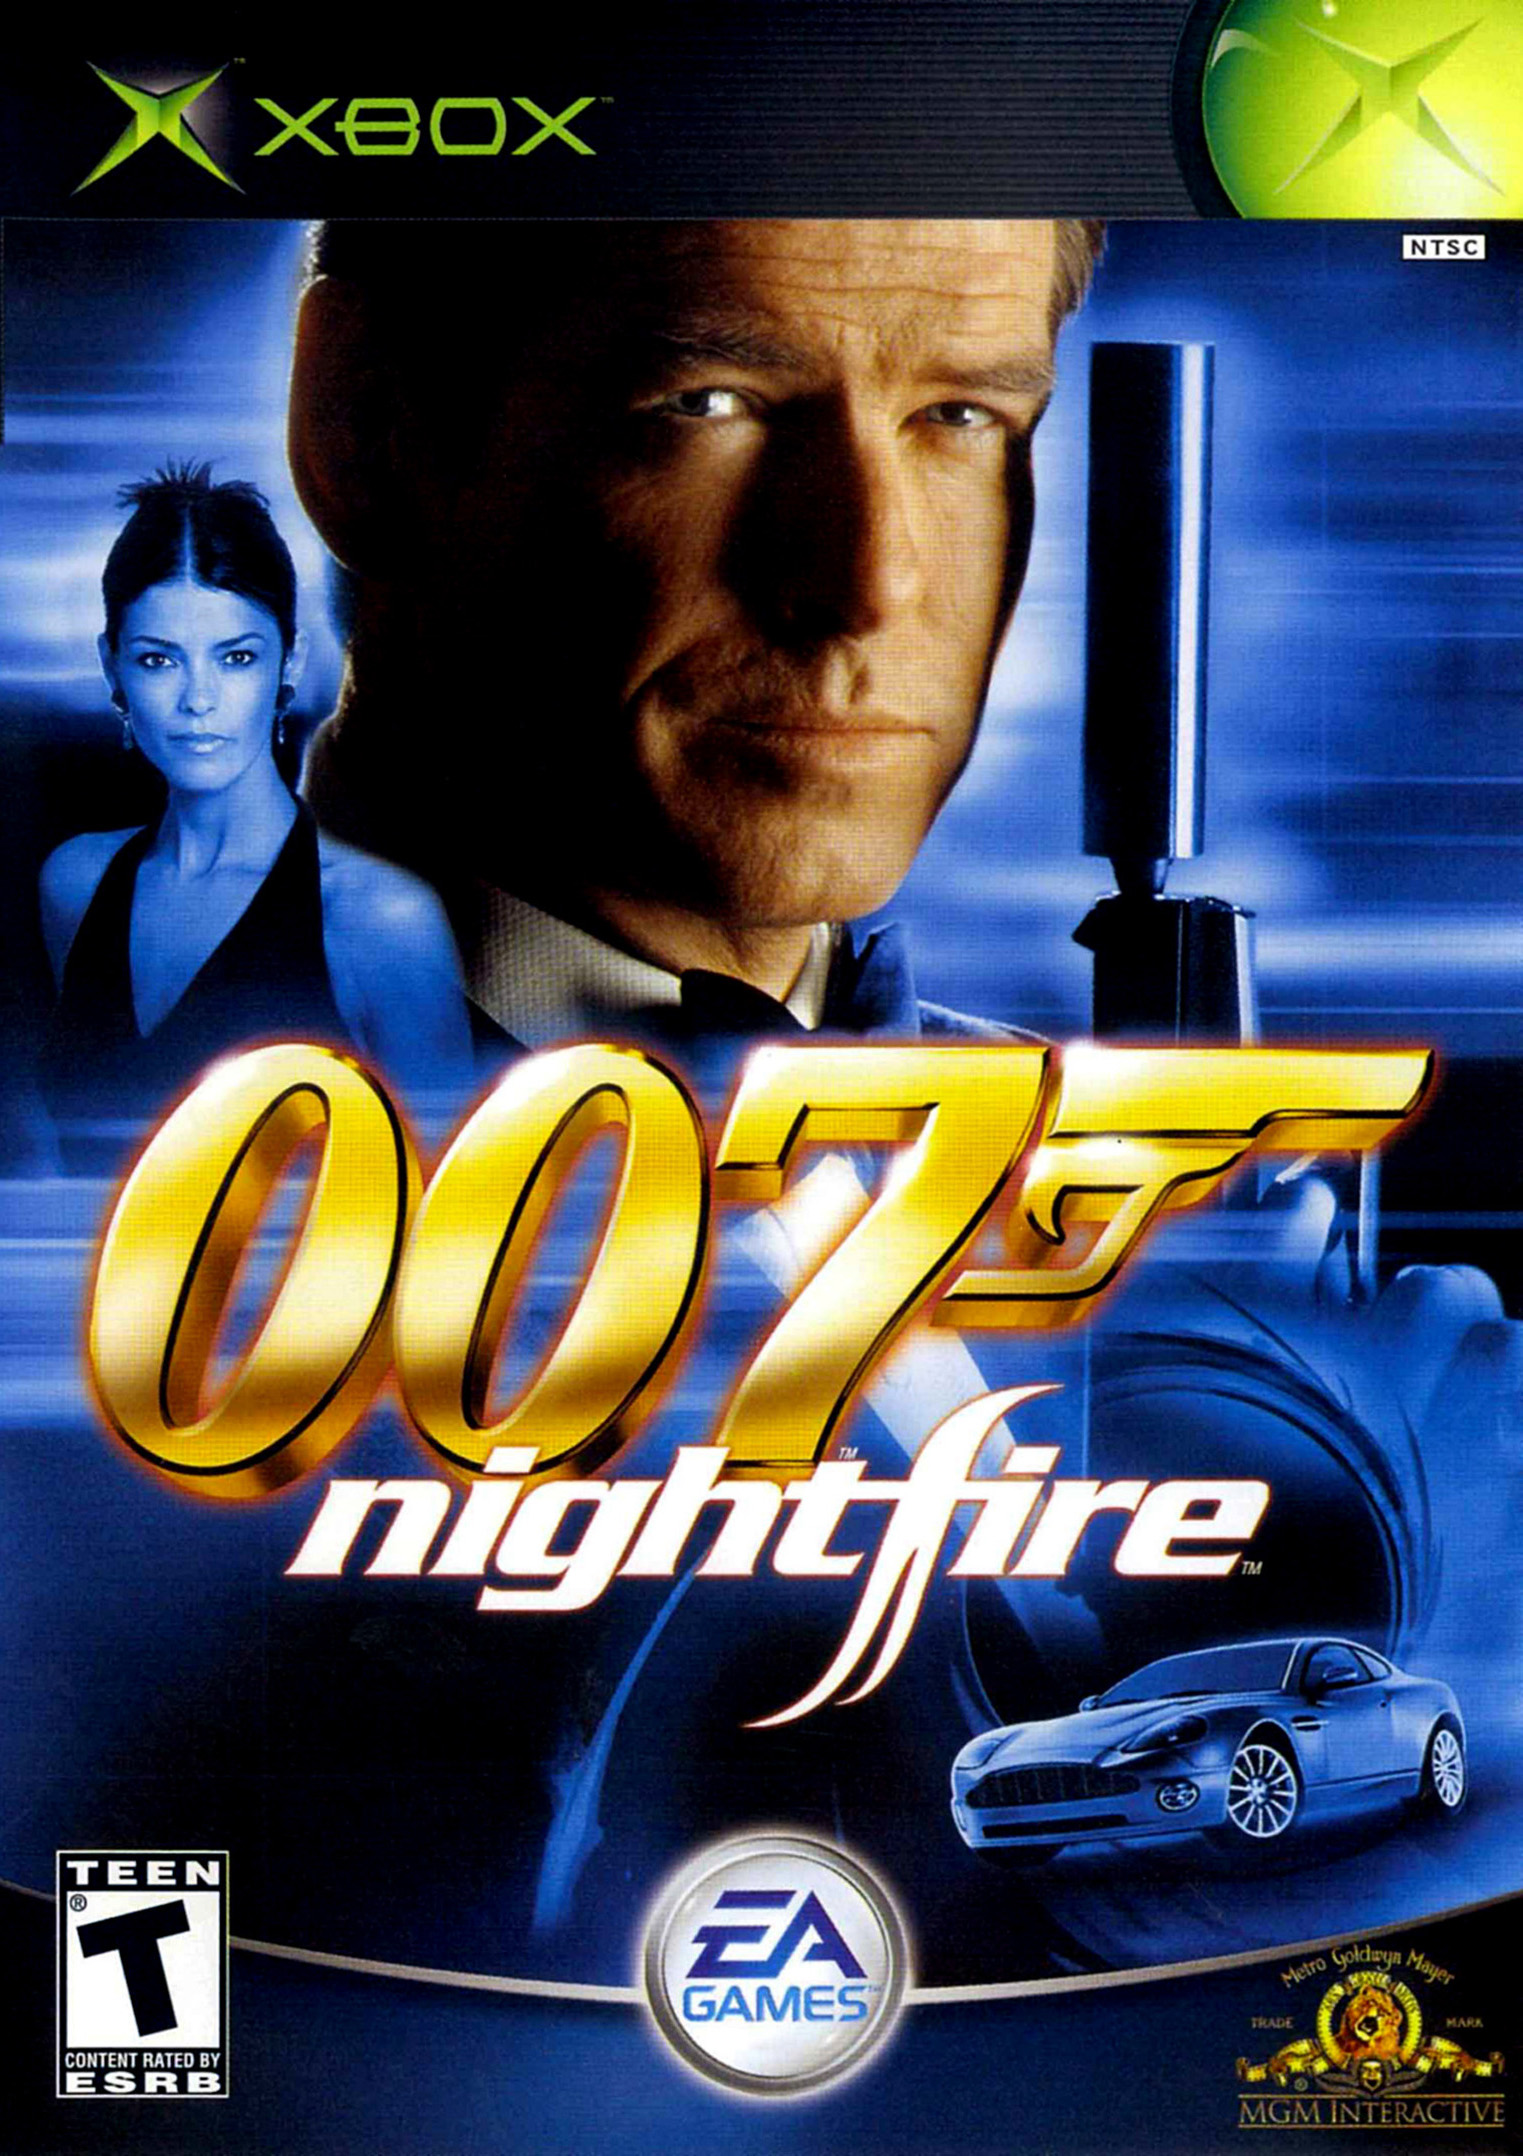 james-bond-007-nightfire-strategywiki-the-video-game-walkthrough-and-strategy-guide-wiki